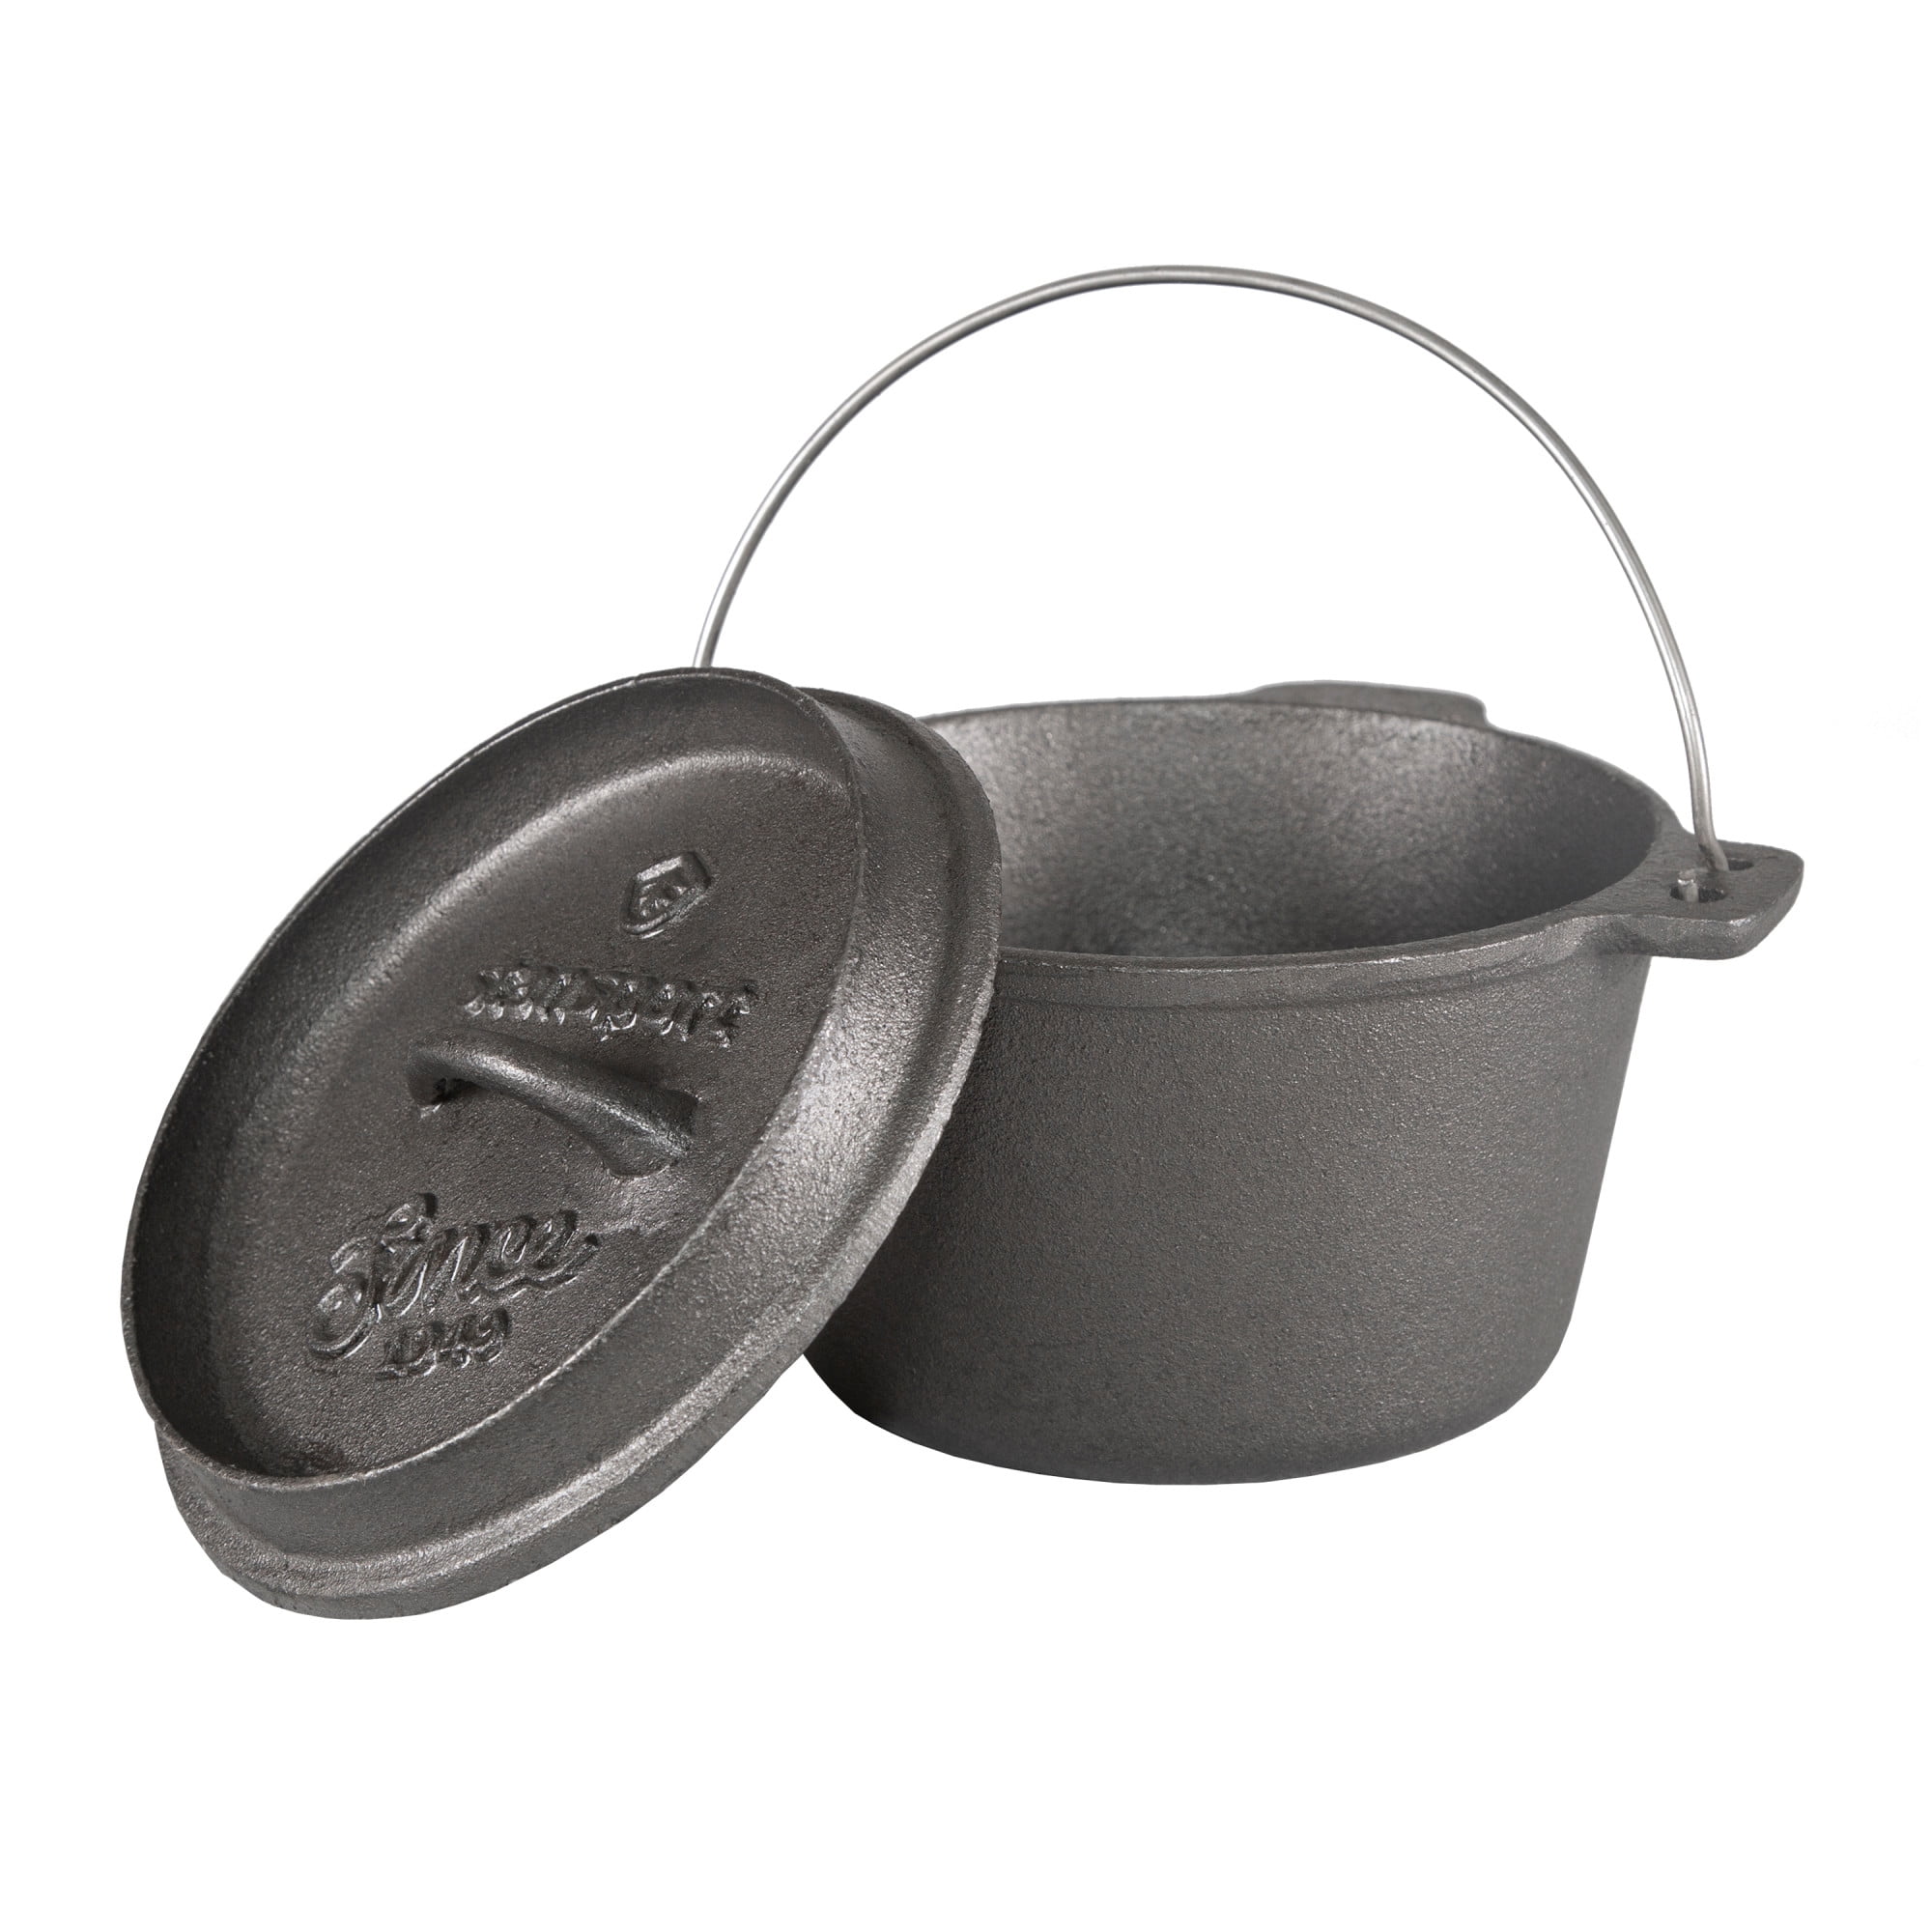 Stansport 4 qt Pre-Seasoned Cast Iron Dutch Oven with Legs